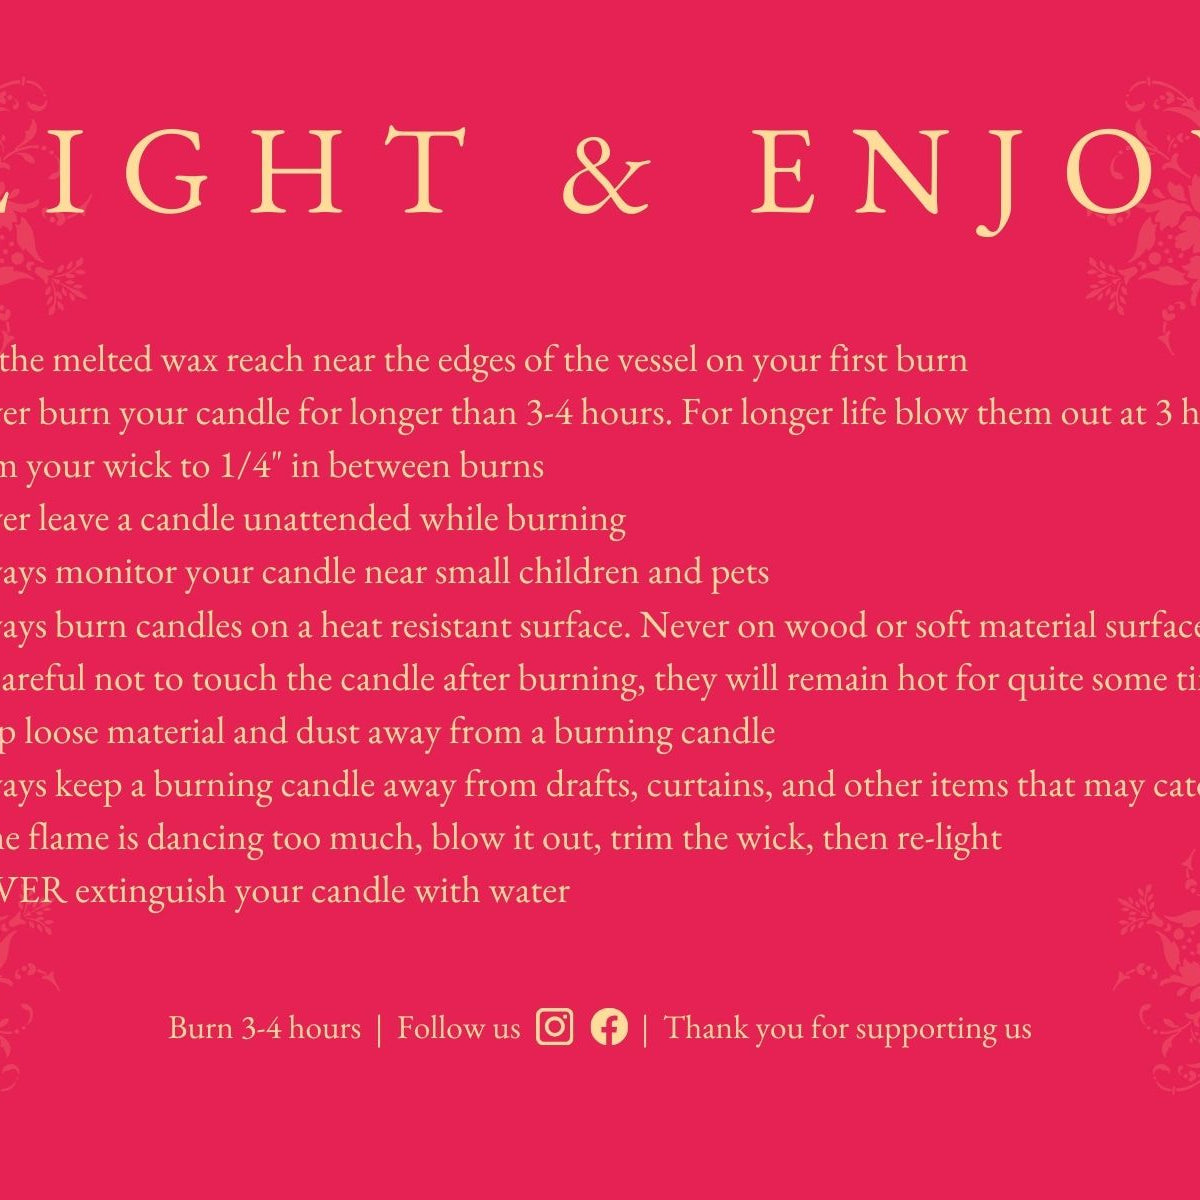 Printed Ornate Pink Candle Care Cards | 50